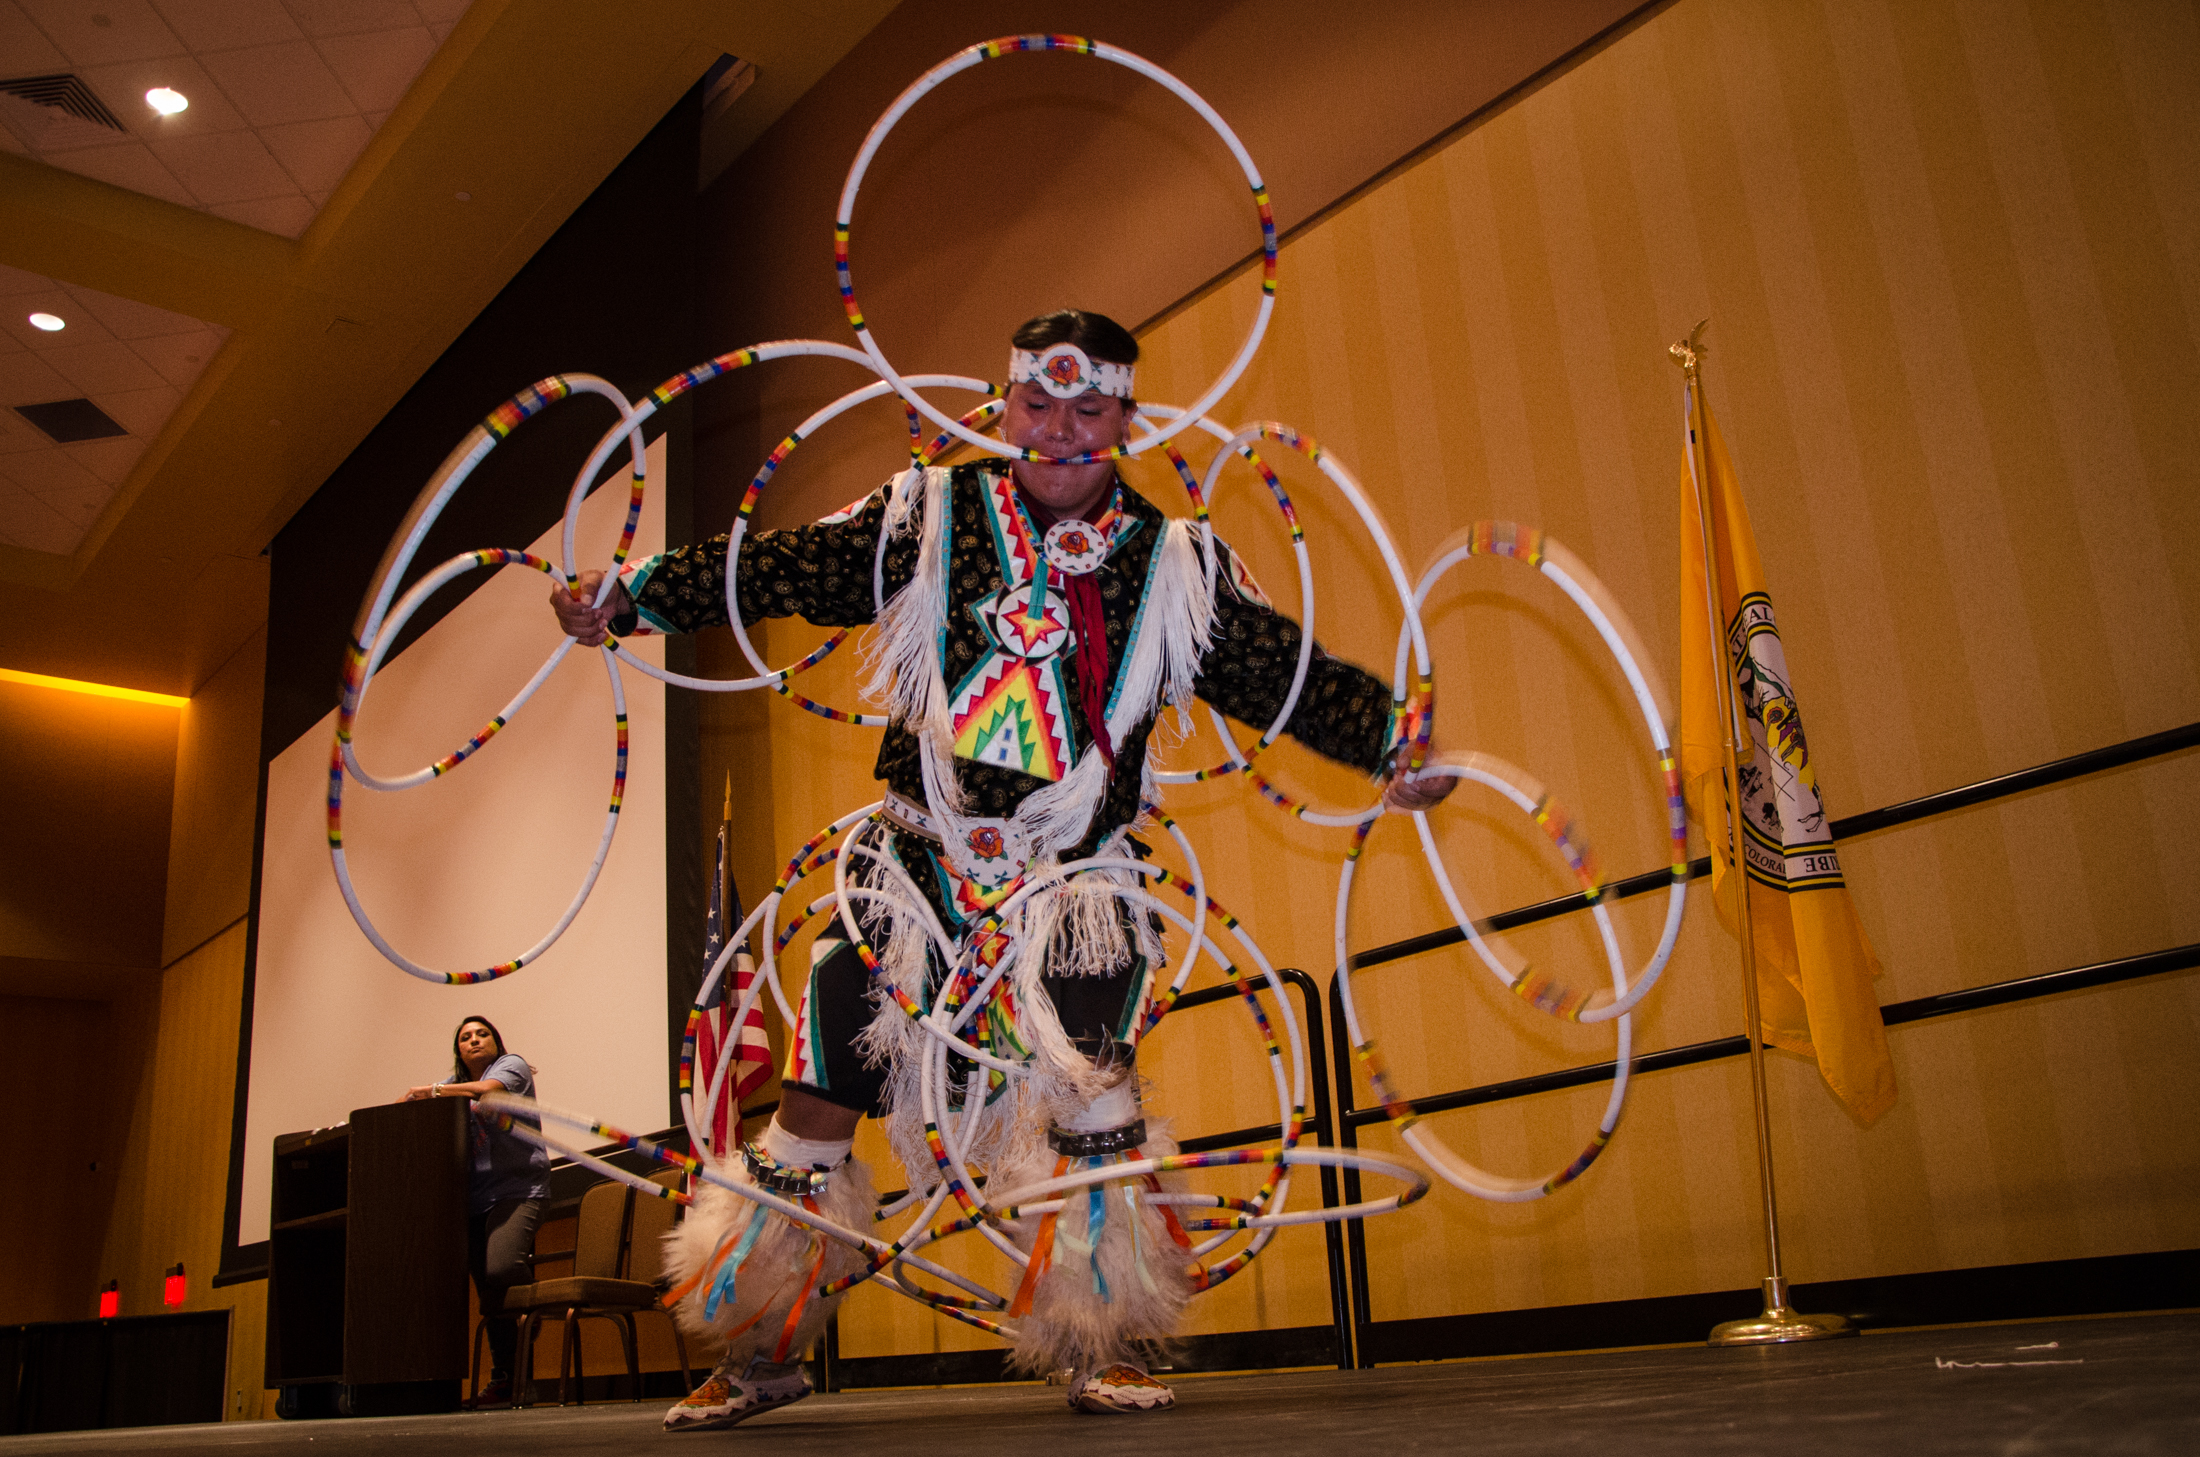 Charles Denny, a former world champion hoop dancer and descendant of the Northern Ute Tribe, performs during the Opening Ceremony.